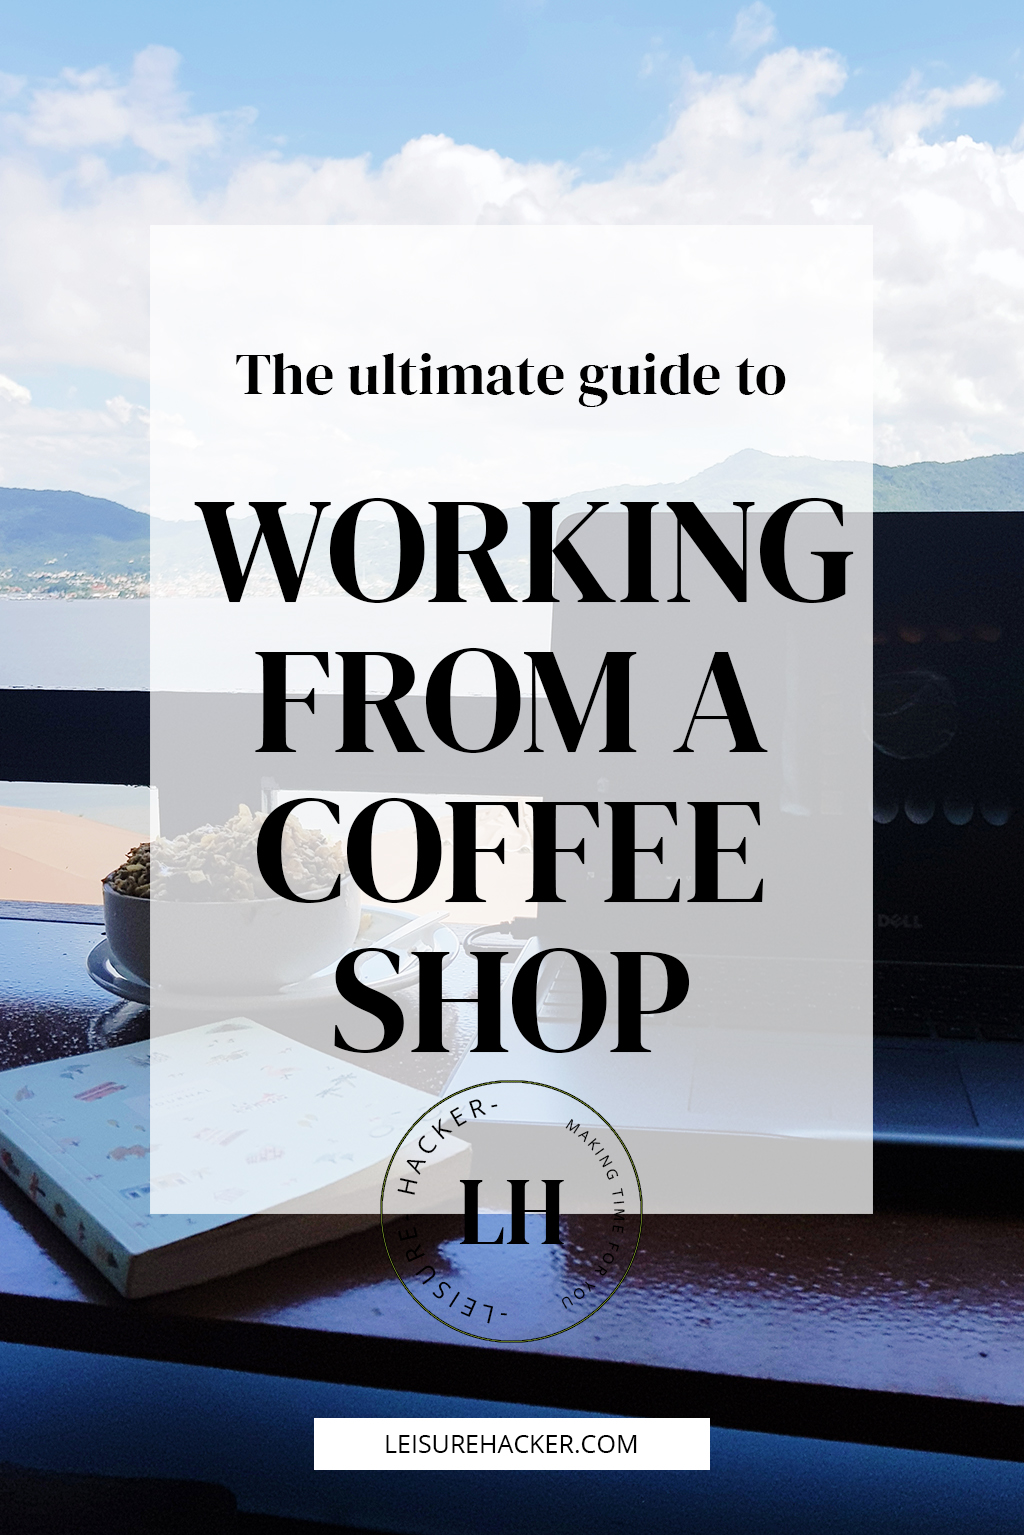 The ultimate guide to working from a coffee shop